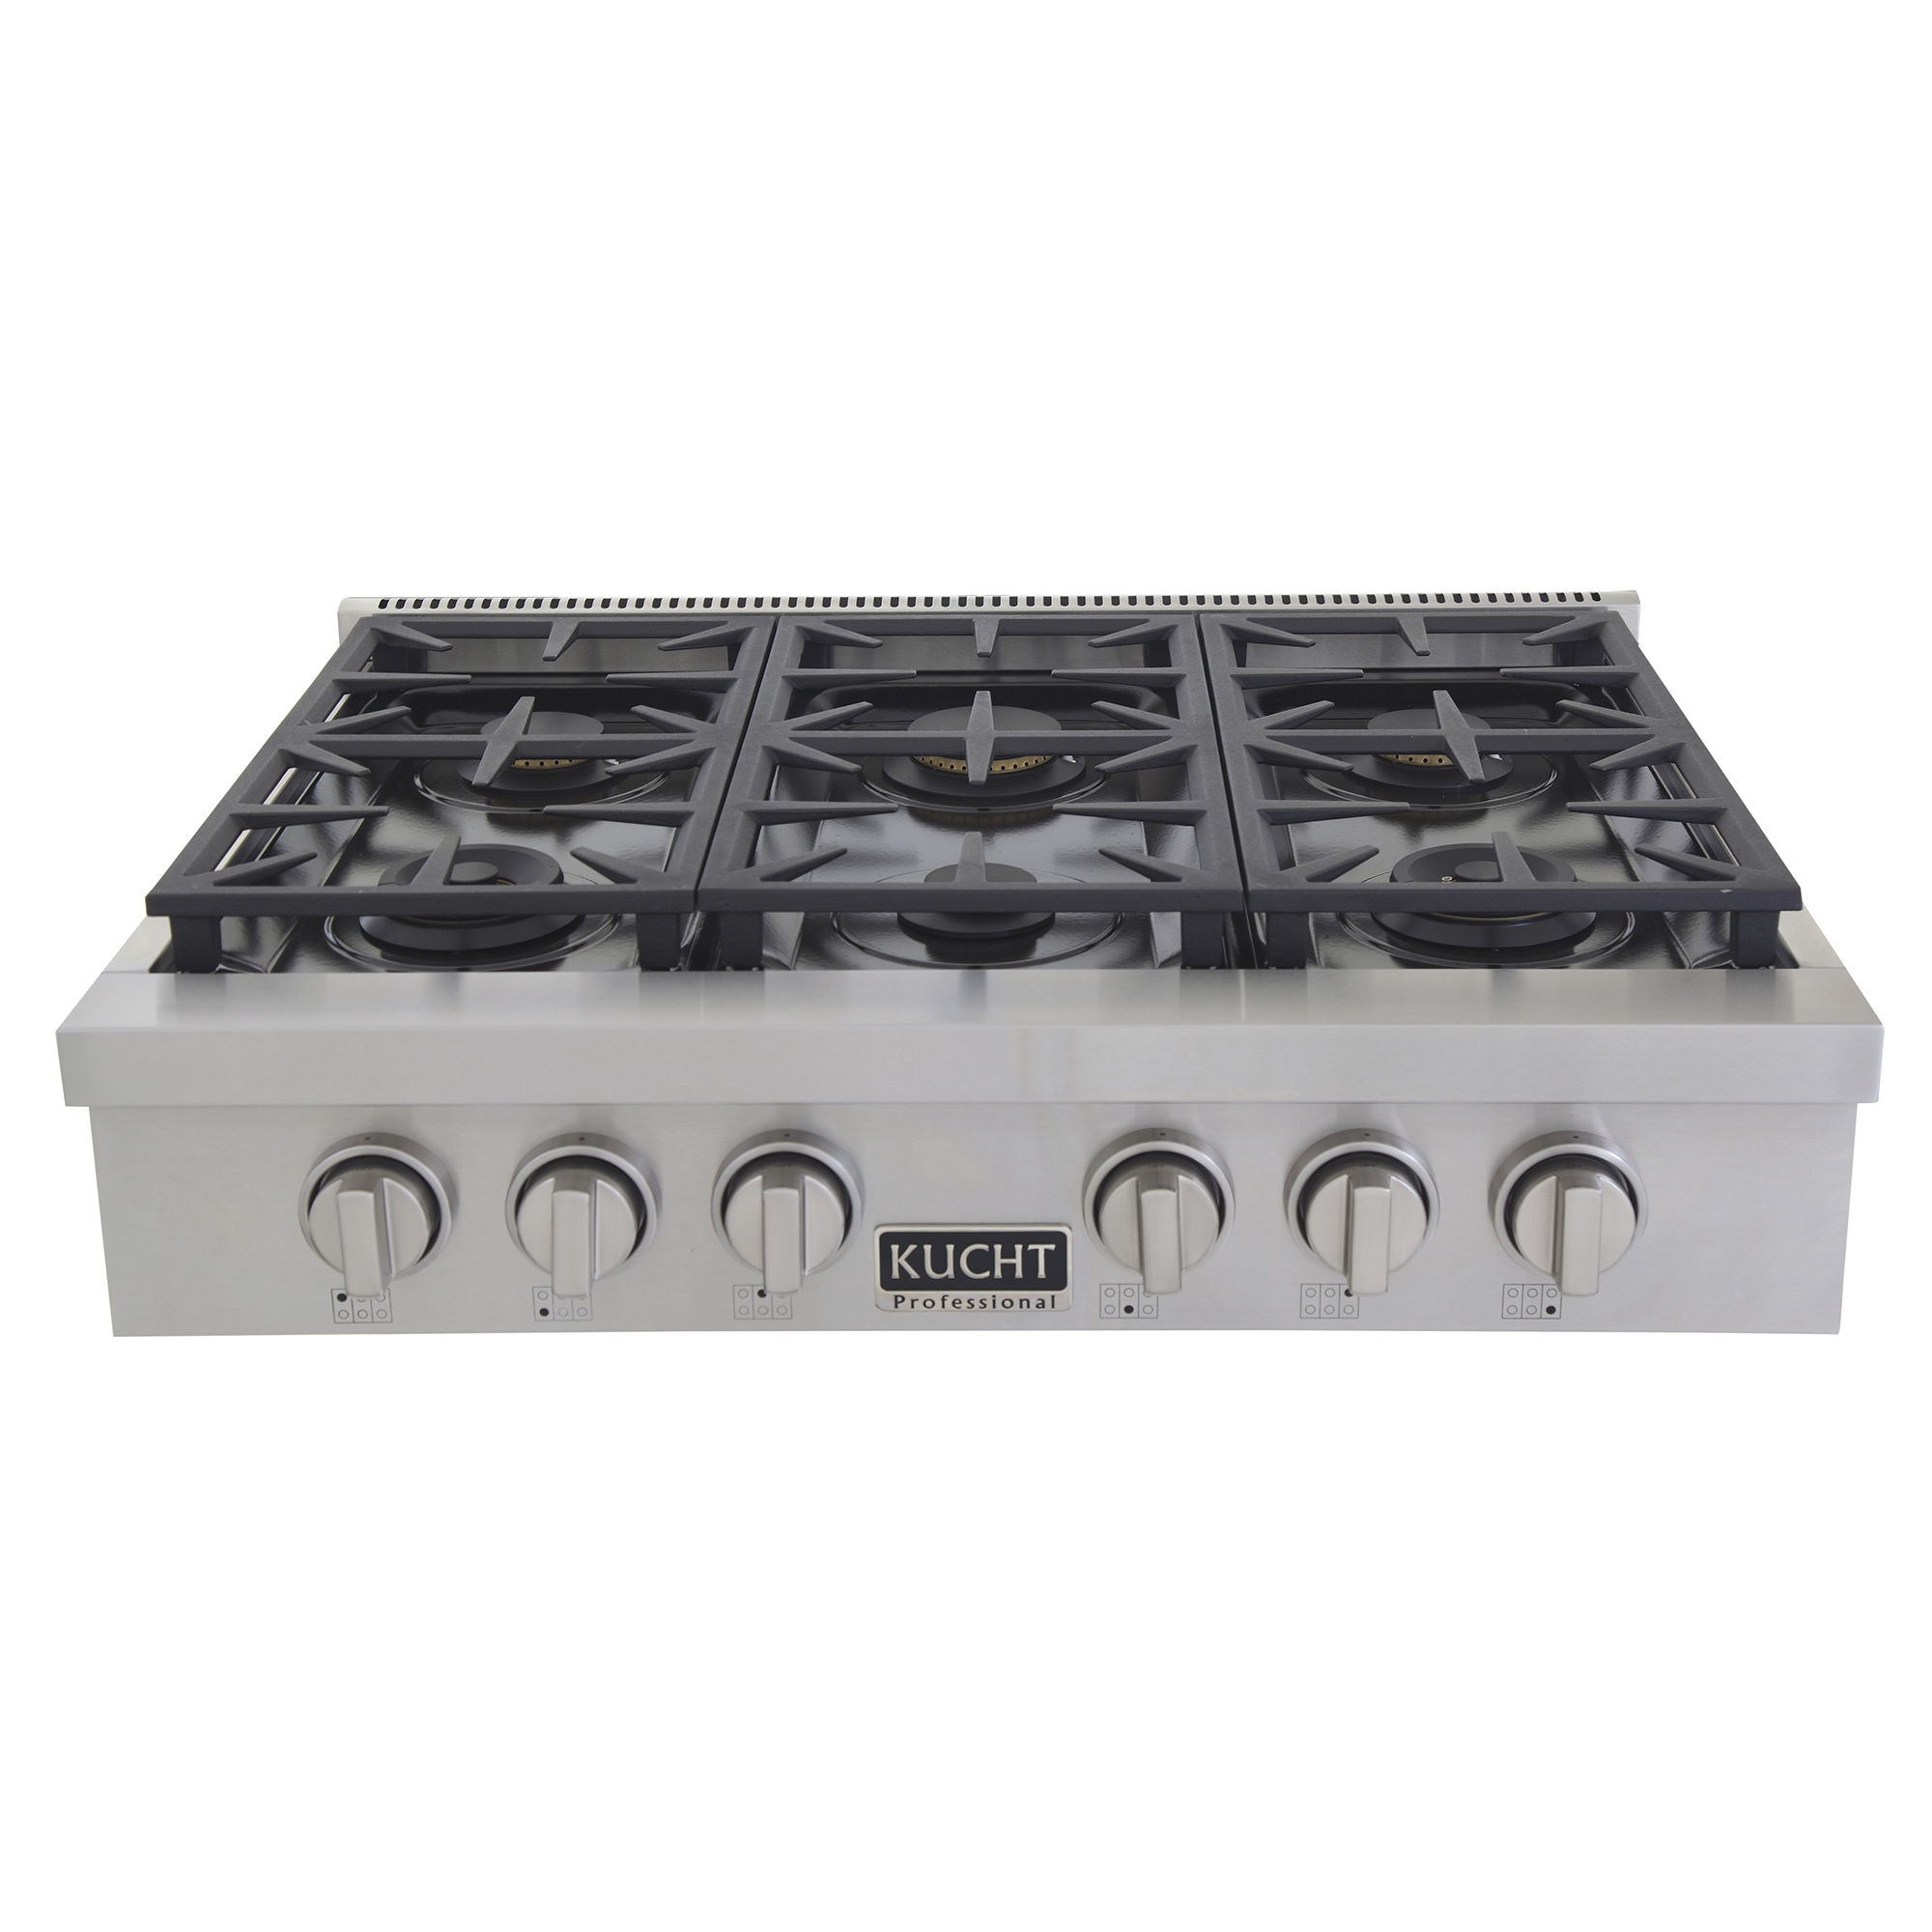 KUCHT Professional 36 in. Propane Gas Range Top with Sealed Burners in Stainless Steel with Classic Silver Knobs